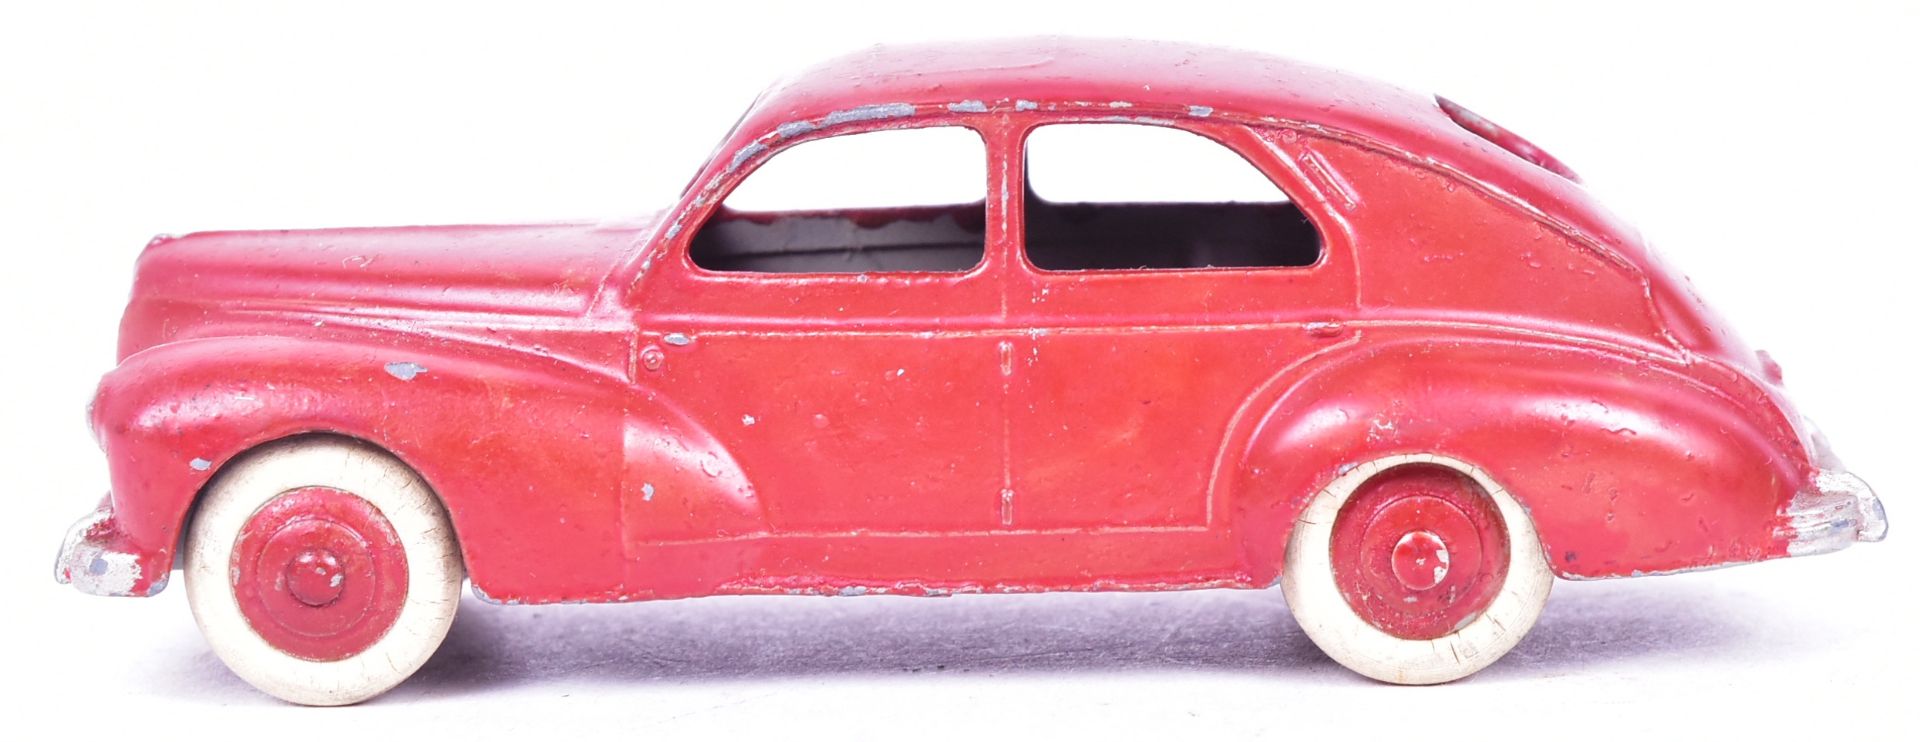 DIECAST - FRENCH DINKY TOYS - PEUGEOT 203 - Image 2 of 5